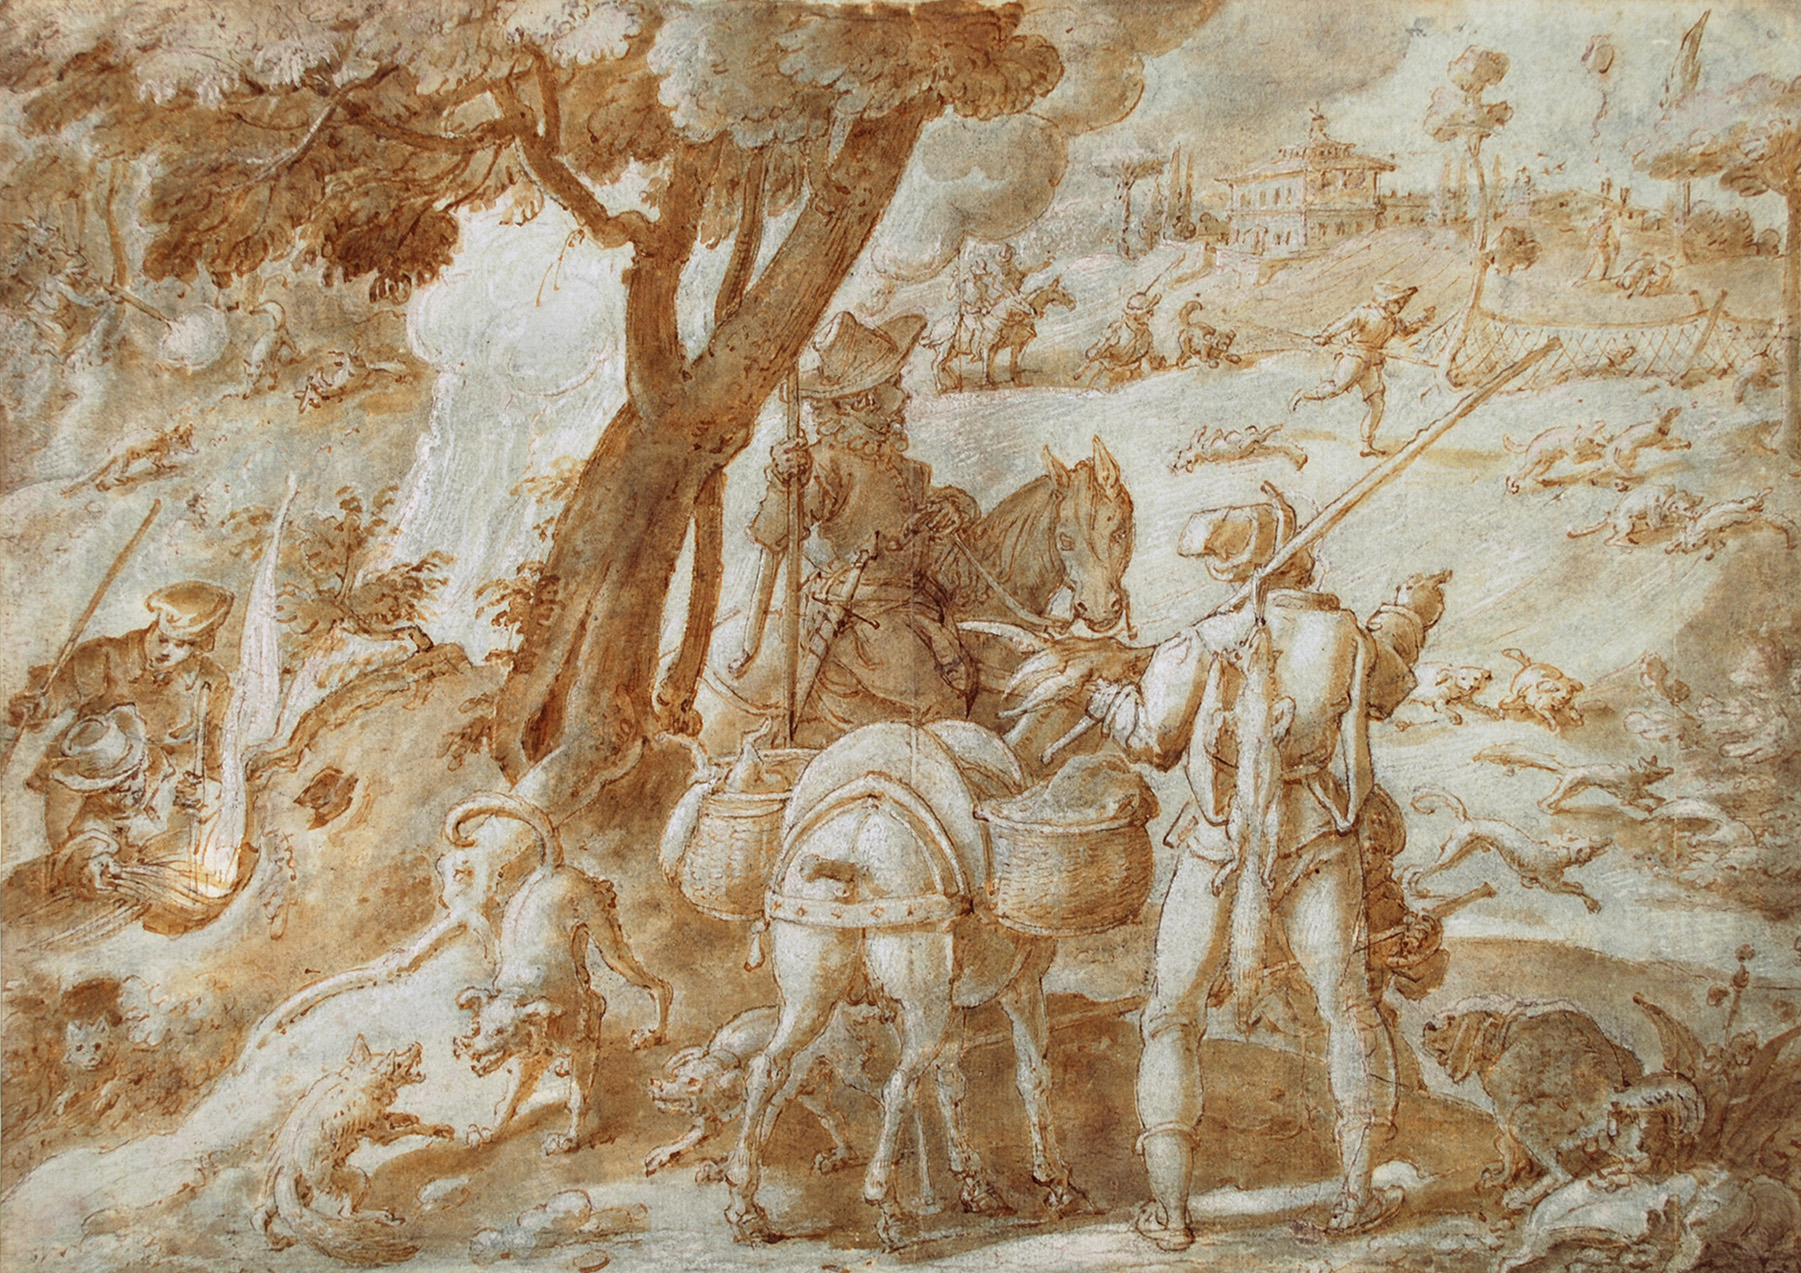 Two men hunting in a forest; one is riding a horse and the other is standing.